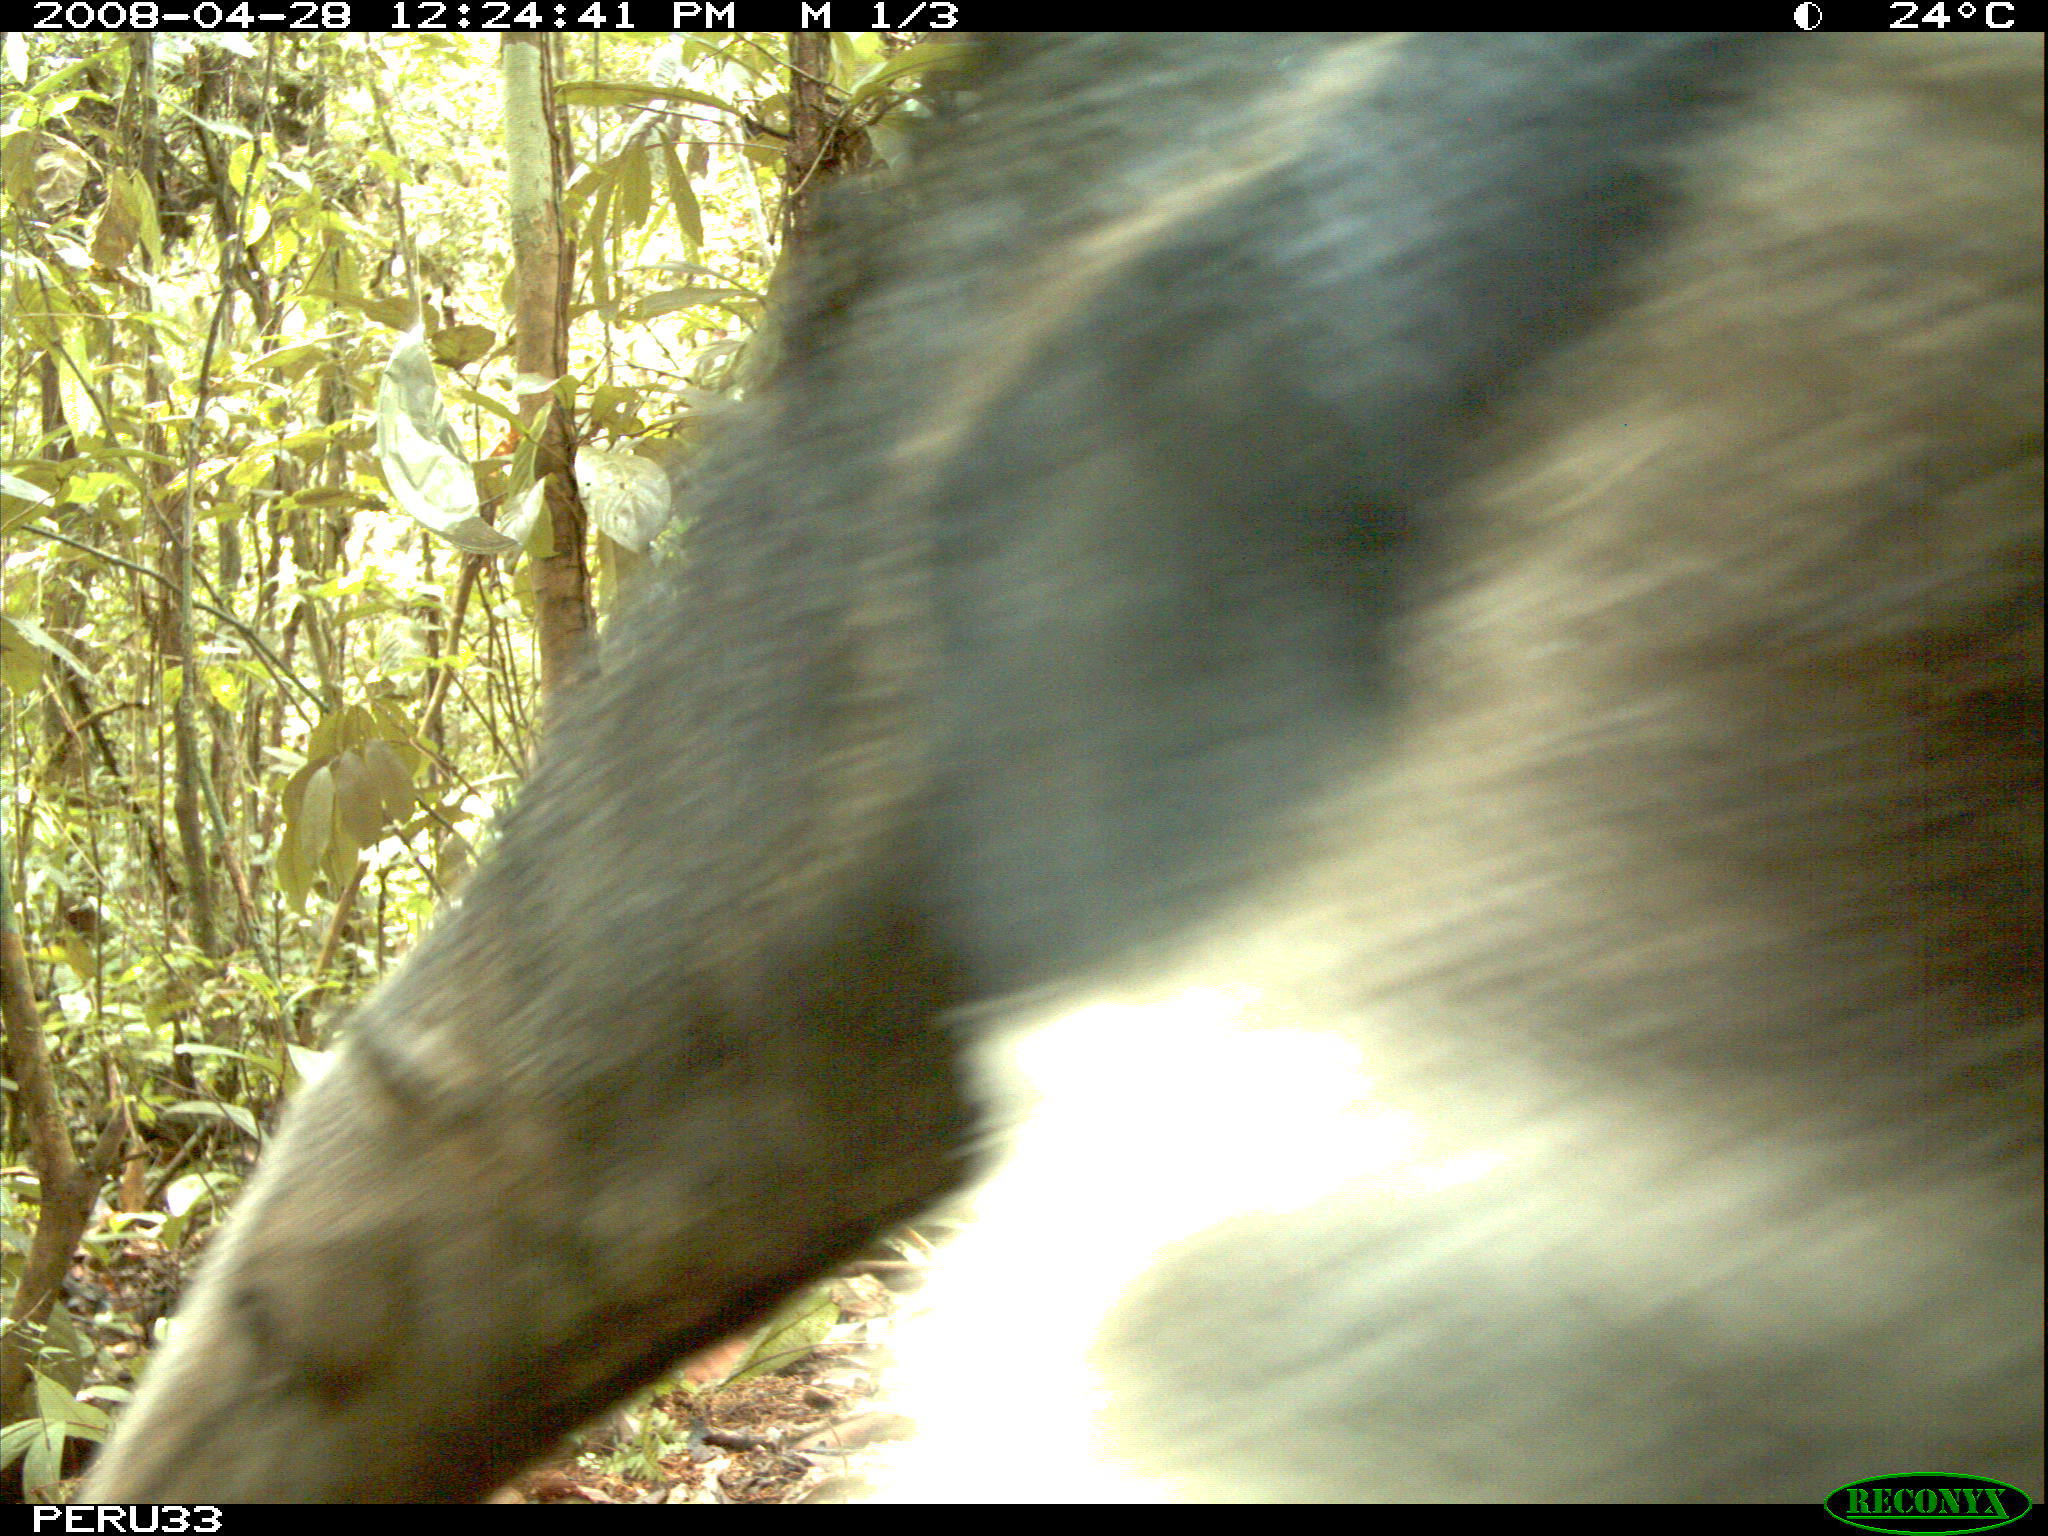 Image of Giant Anteater